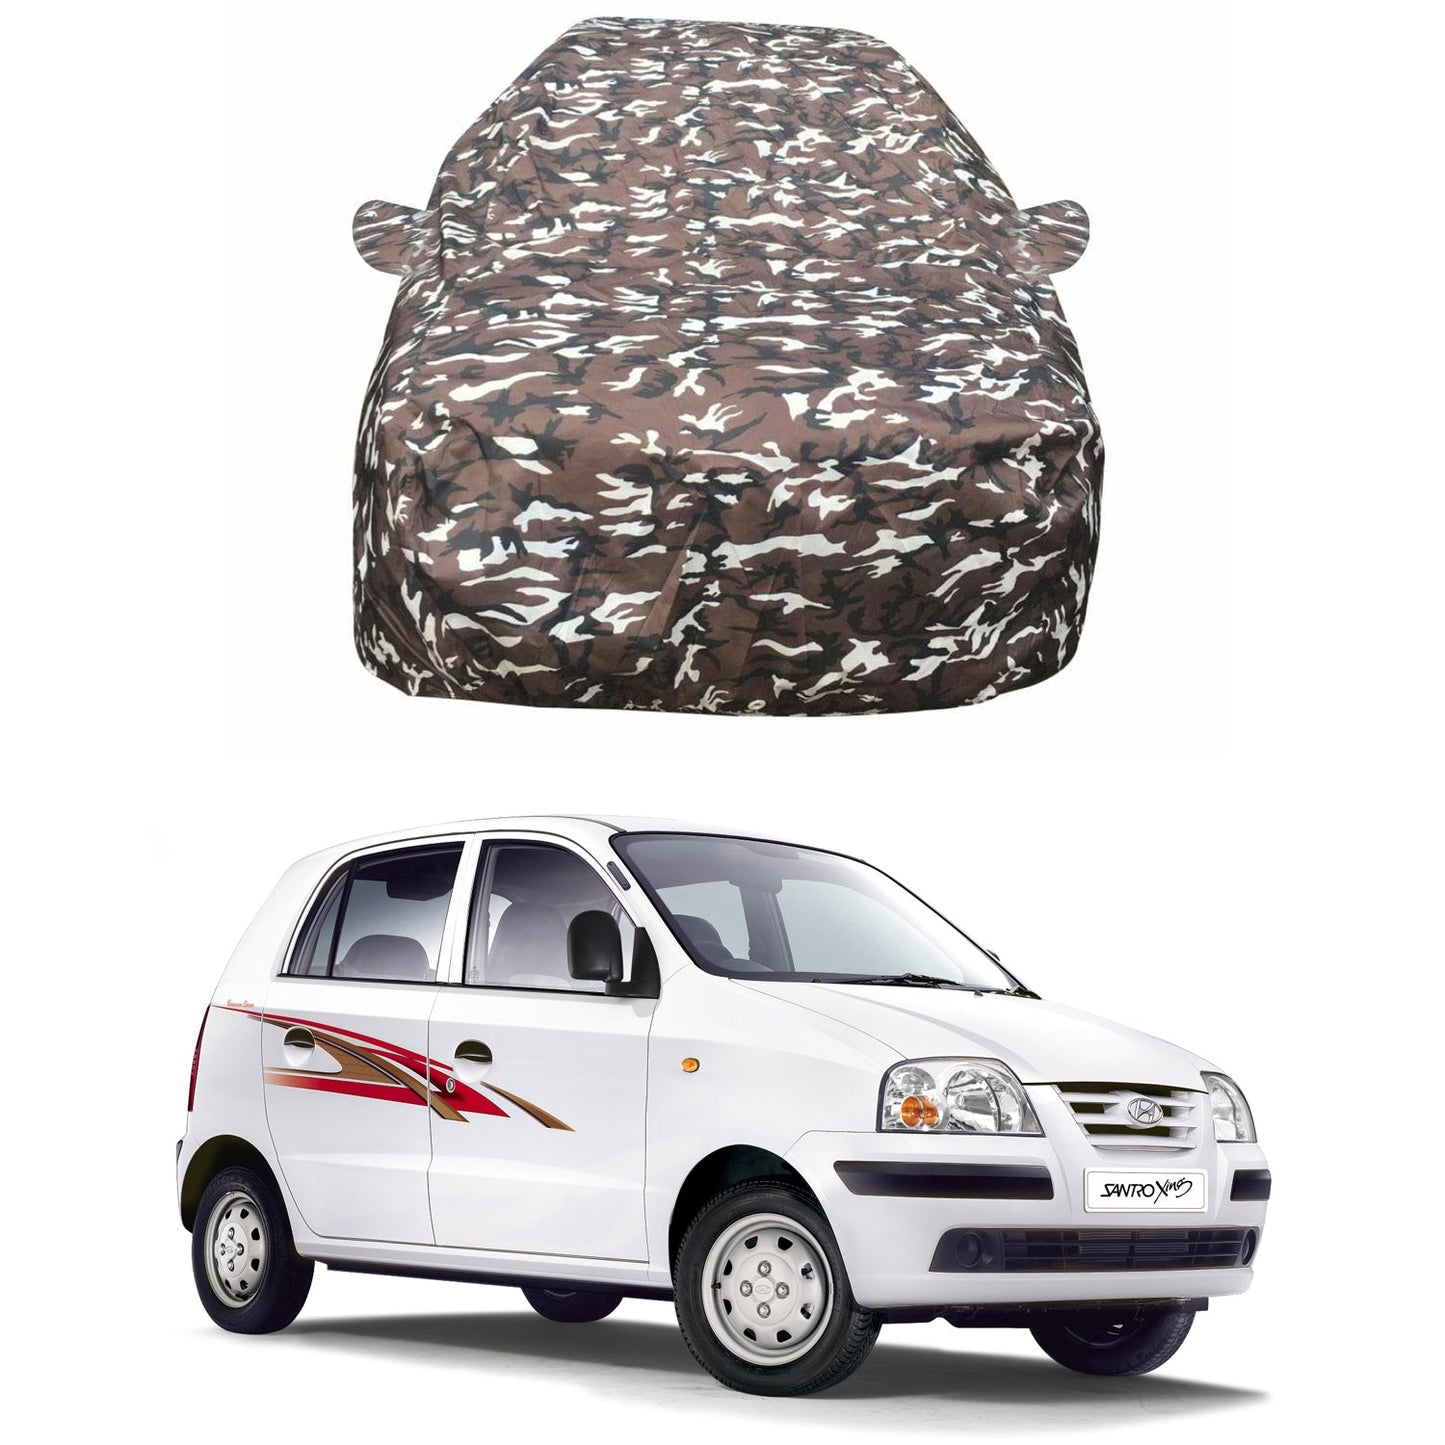 Oshotto Ranger Design Made of 100% Waterproof Car Body Cover with Mirror Pockets For Hyundai Santro Xing Old